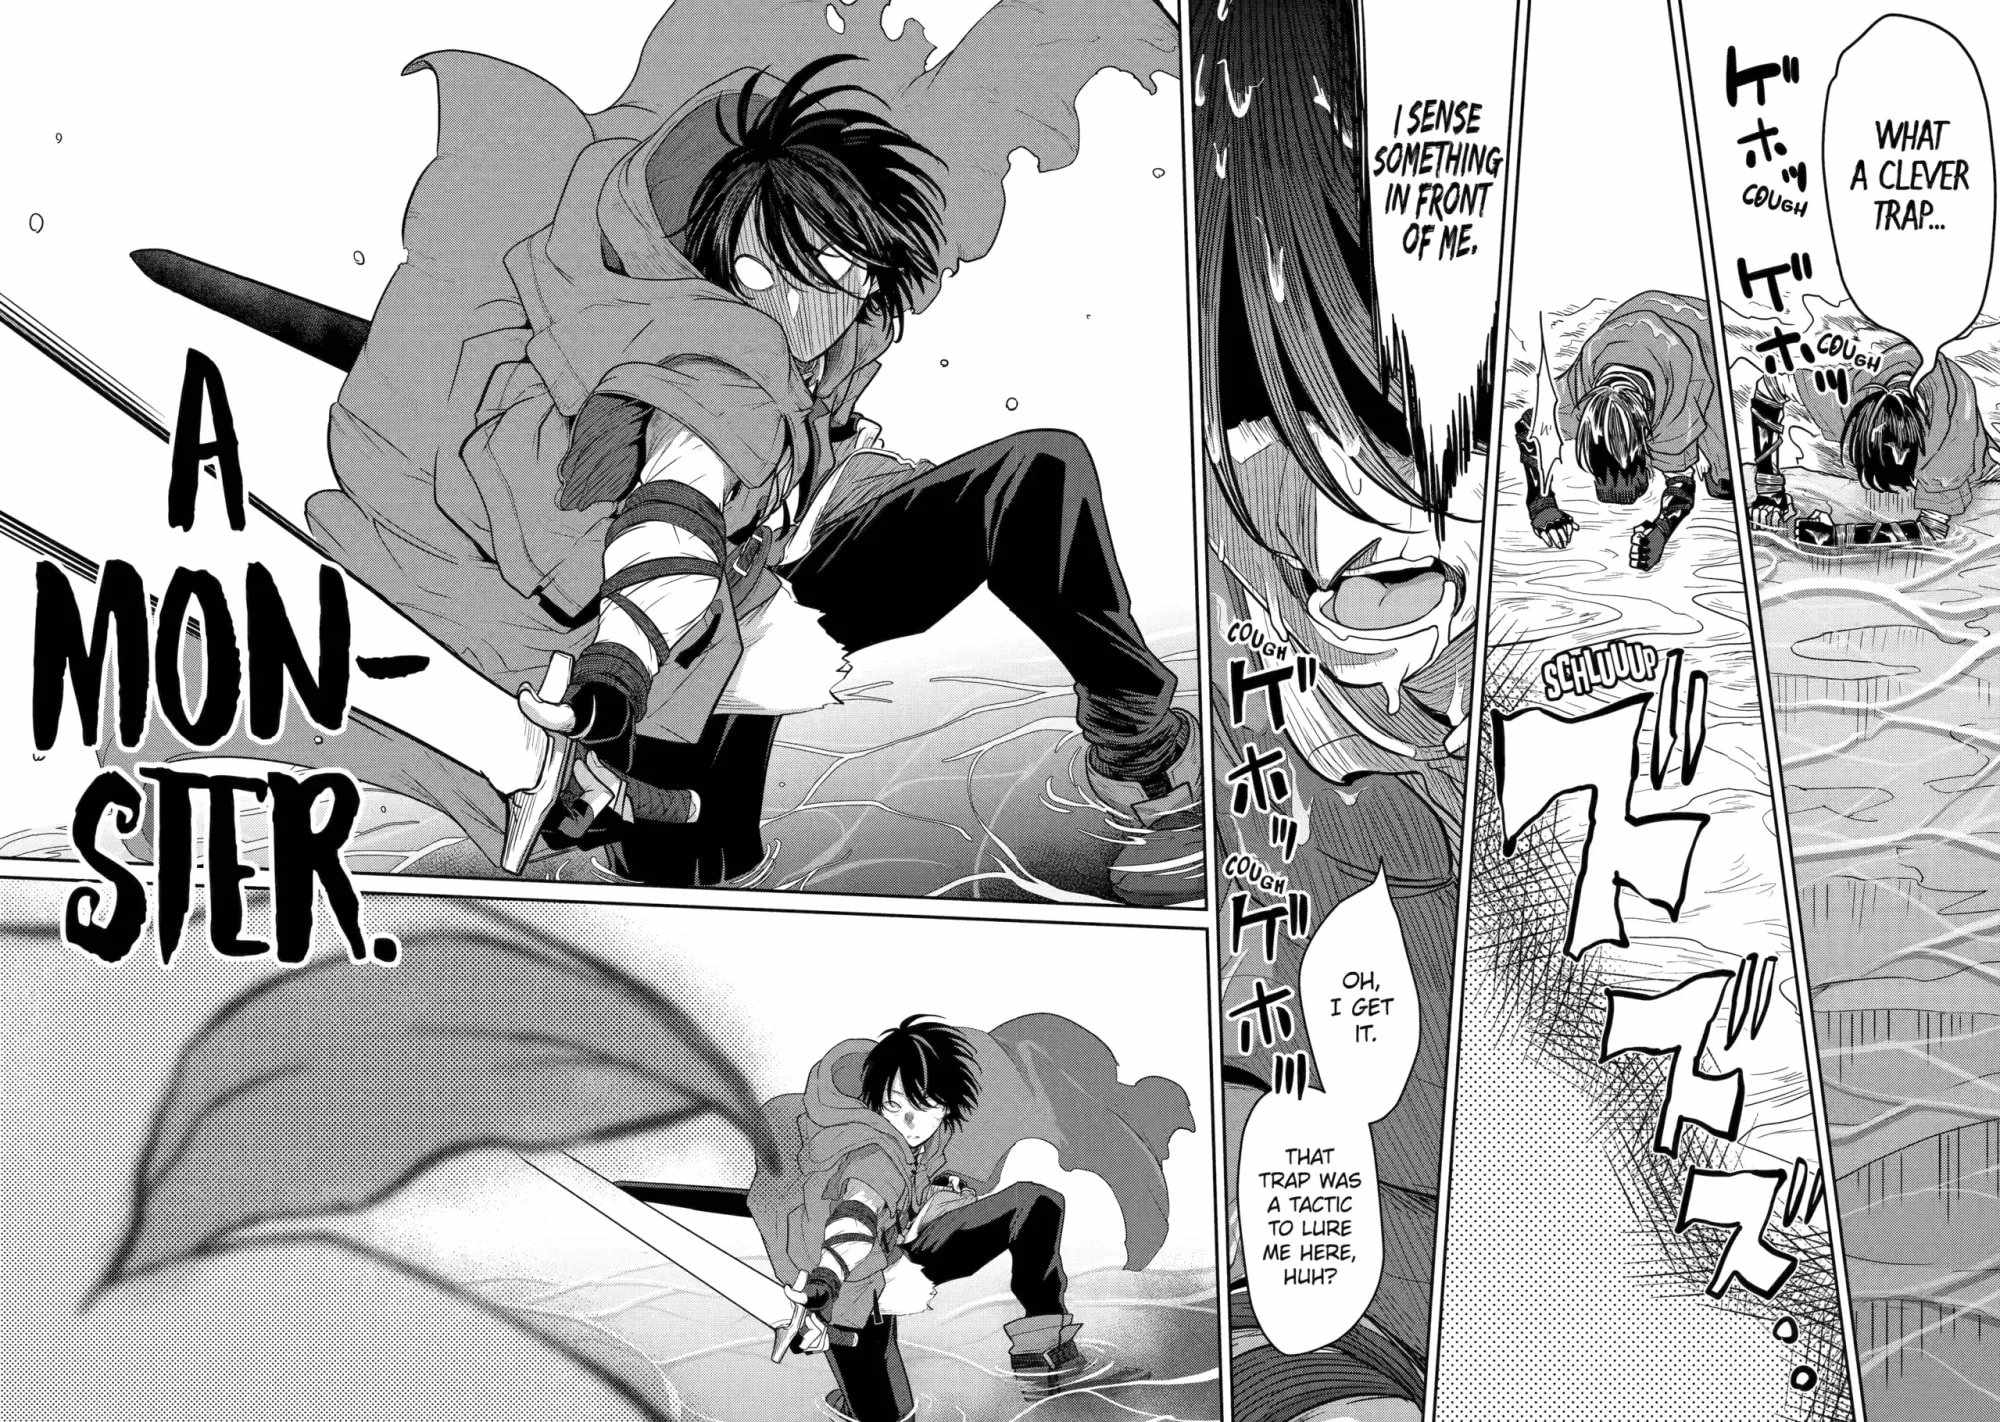 Read Blades Of The Guardians Chapter 4.3 on Mangakakalot